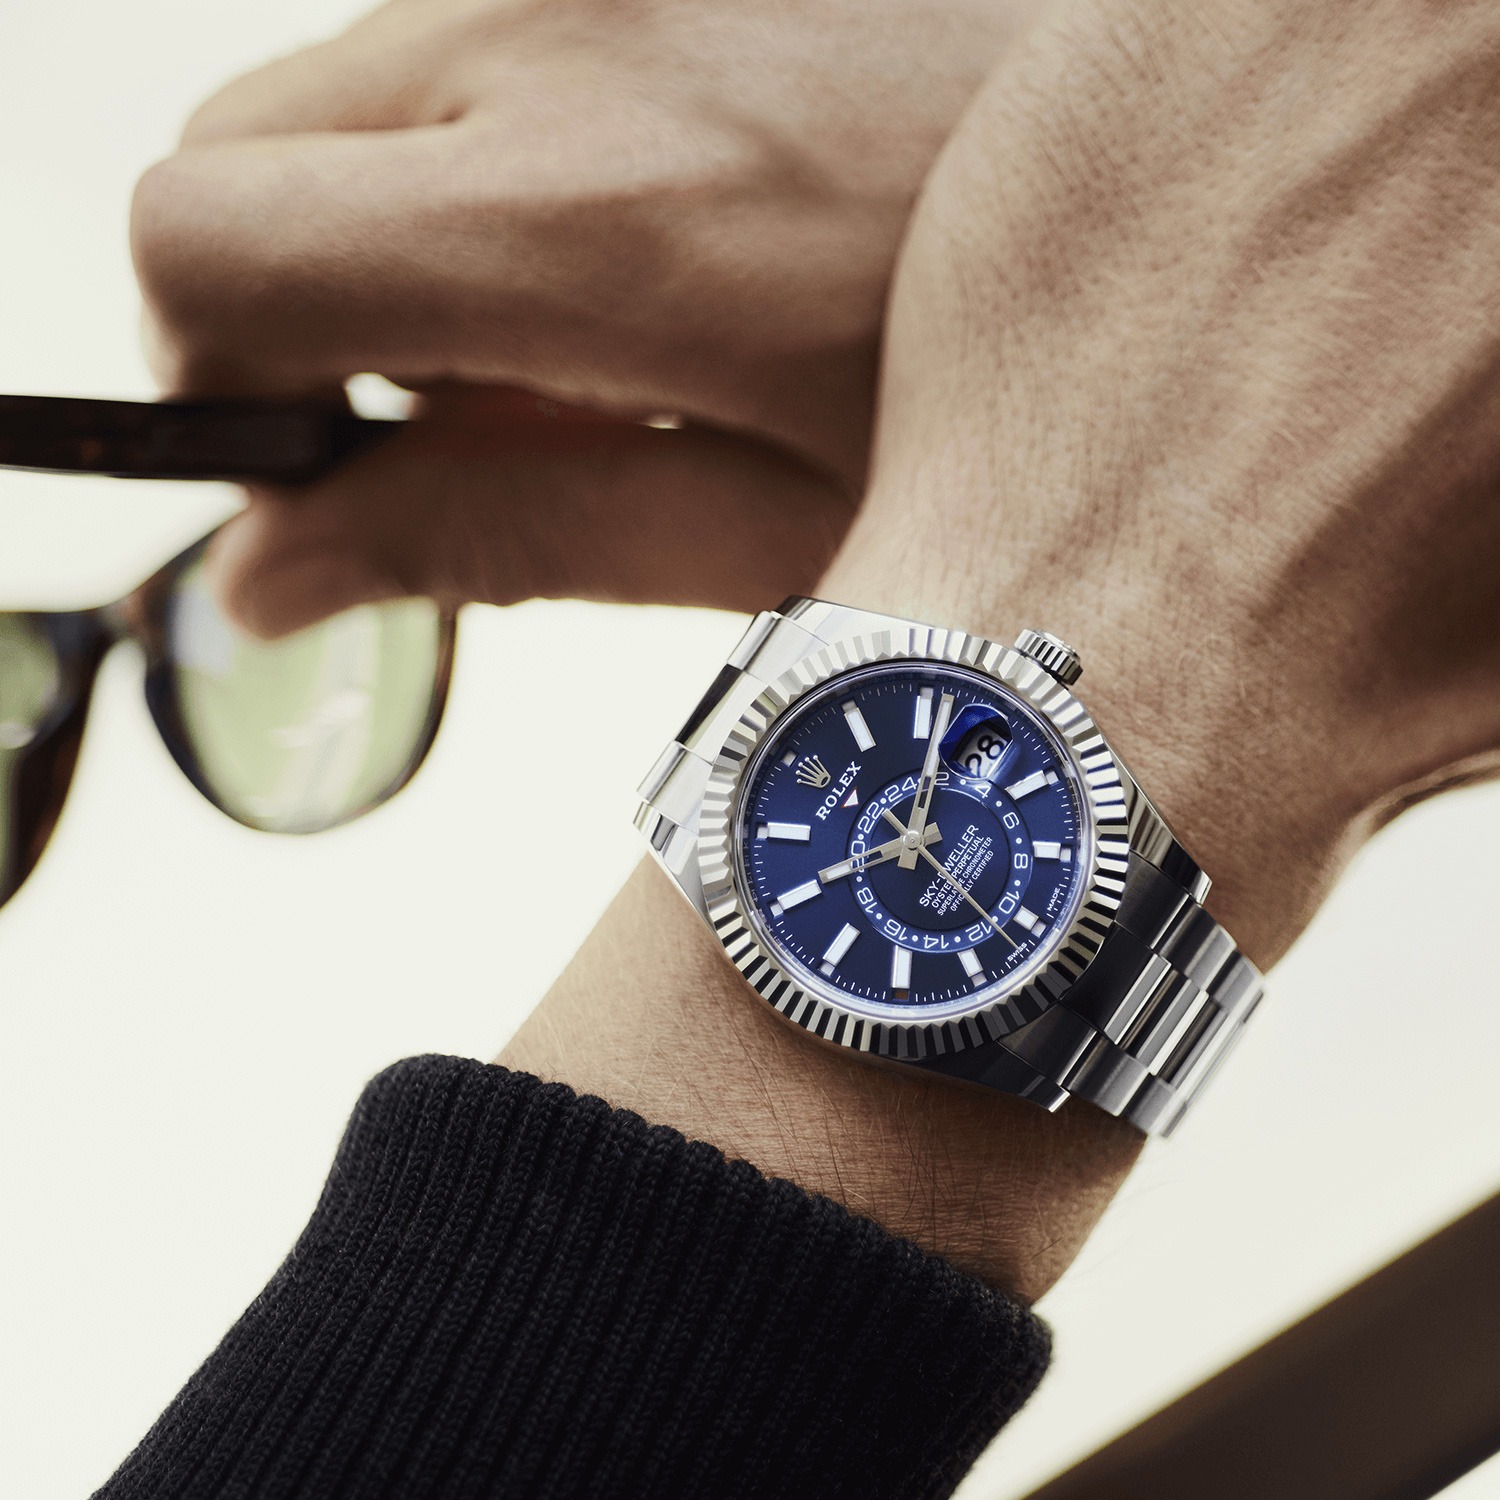 The Rolex Oyster Perpetual Sky-Dweller 